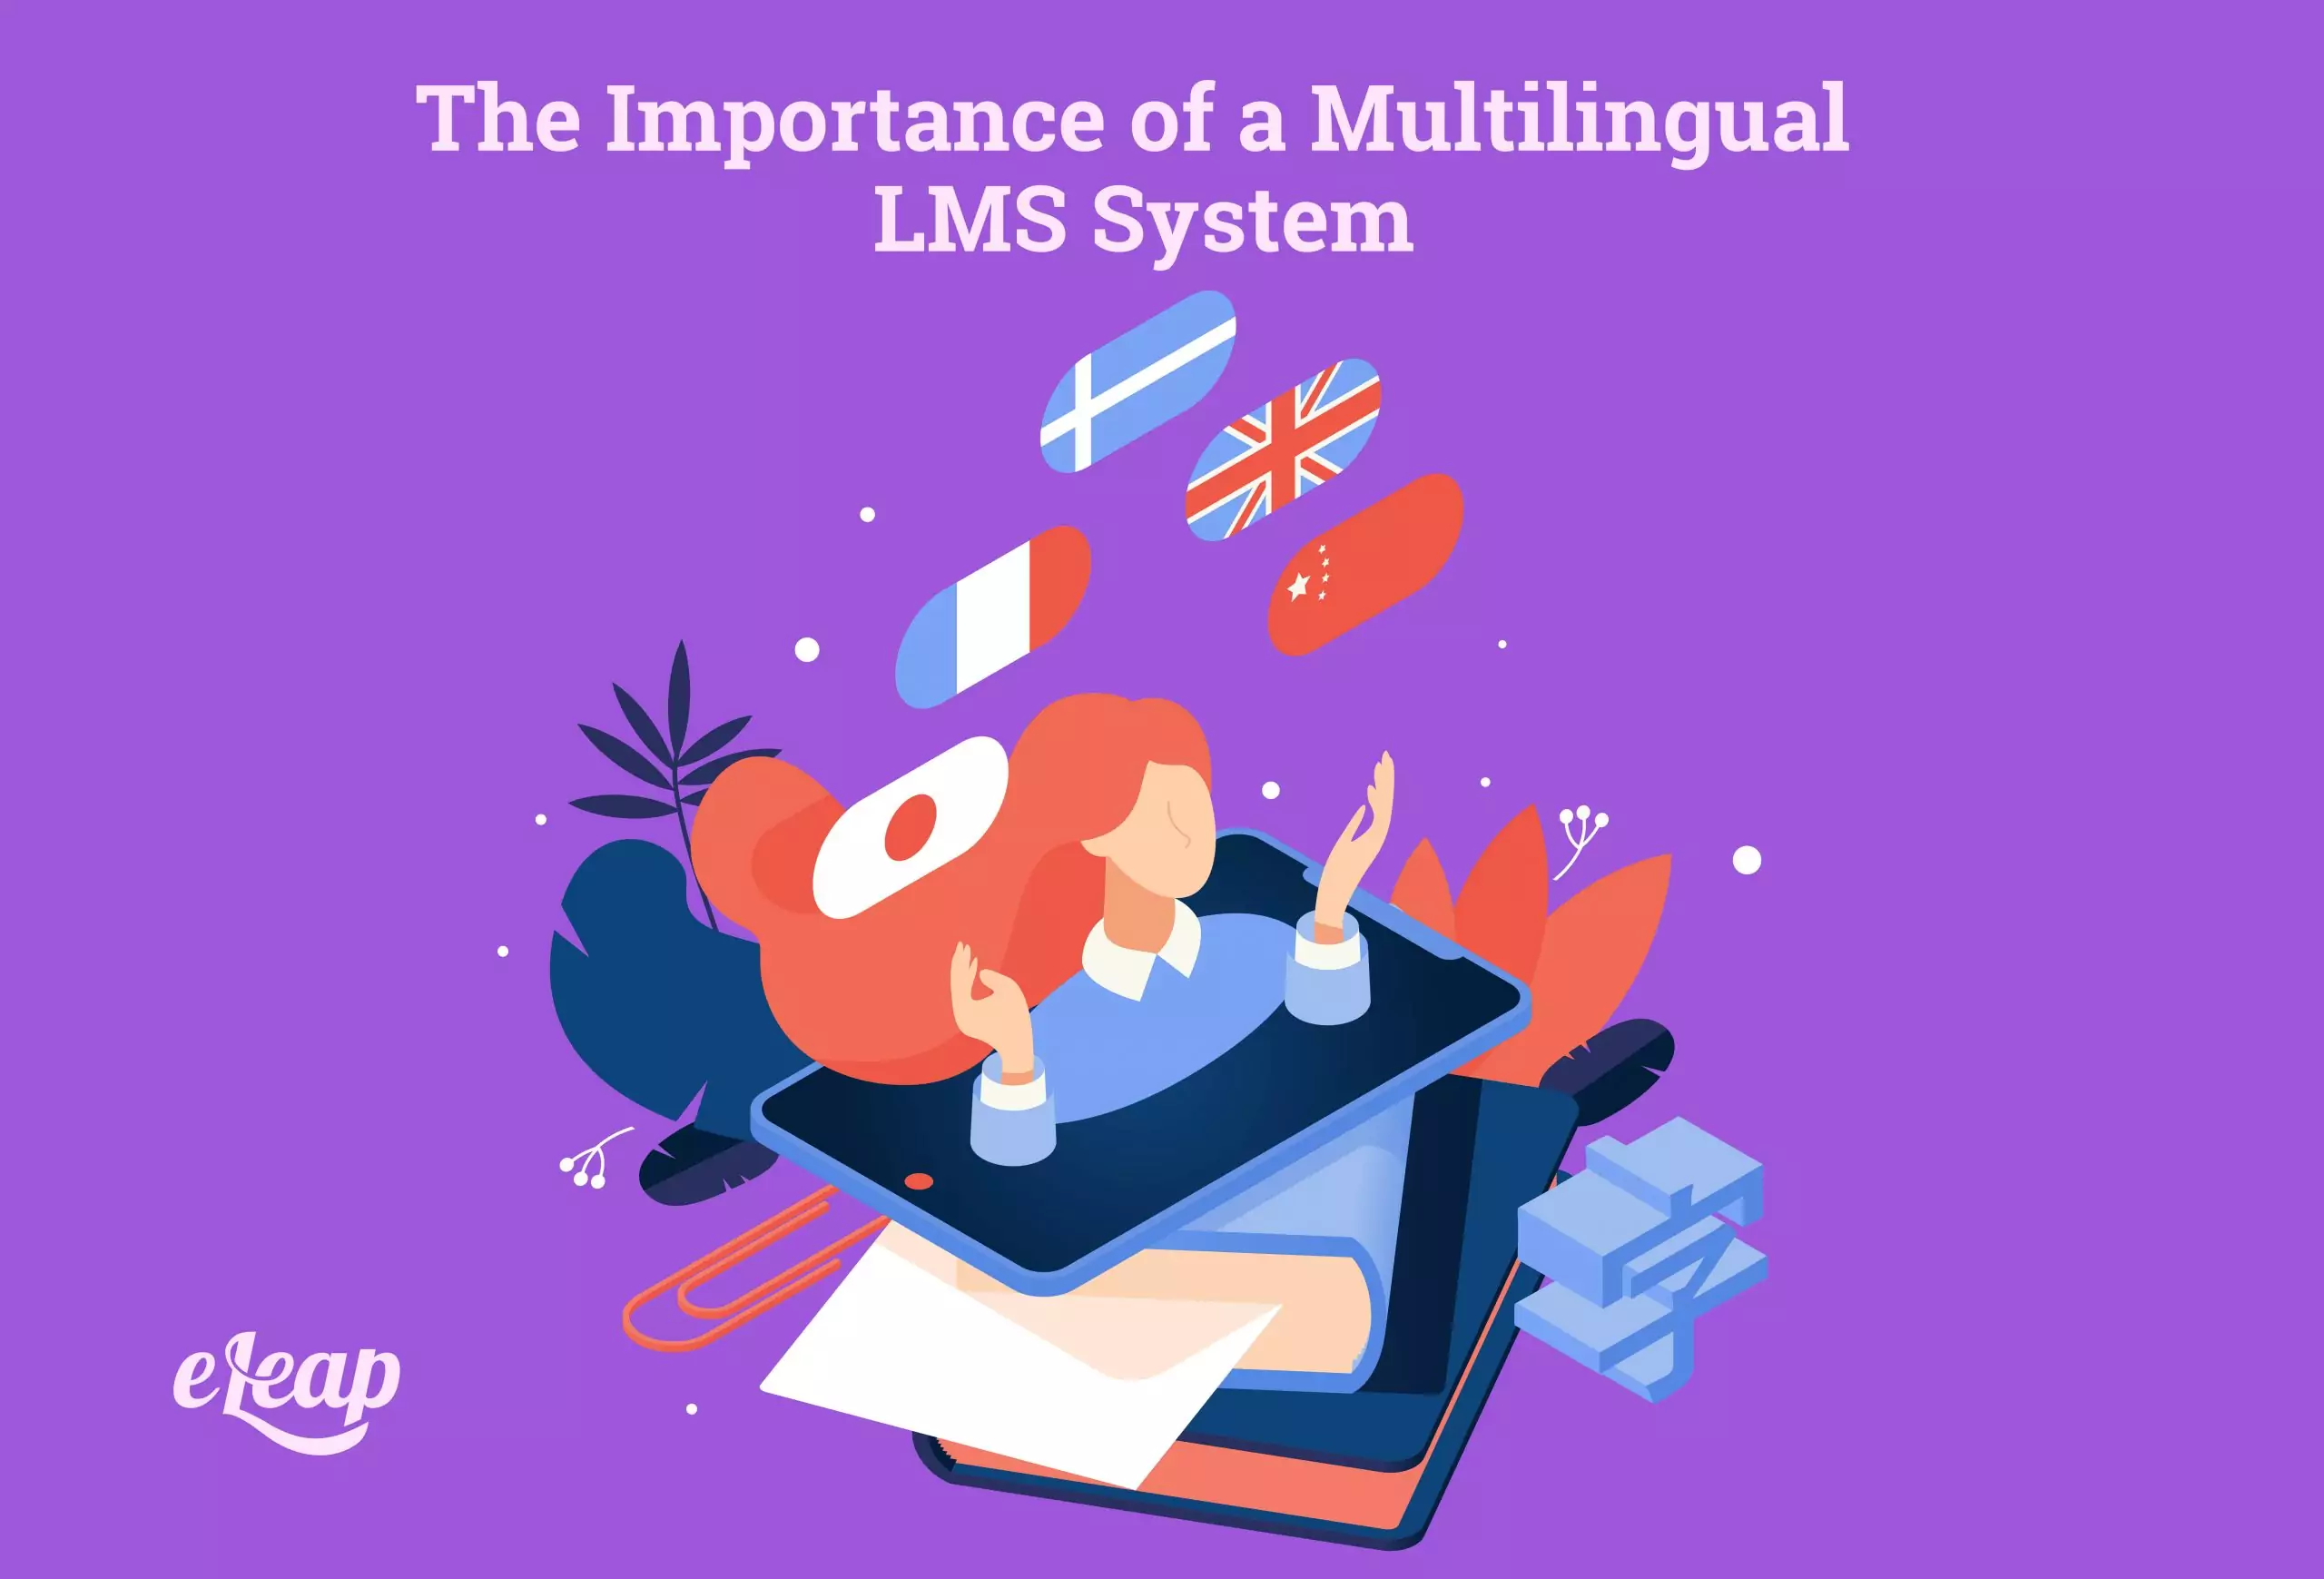 The Importance of a Multilingual LMS System